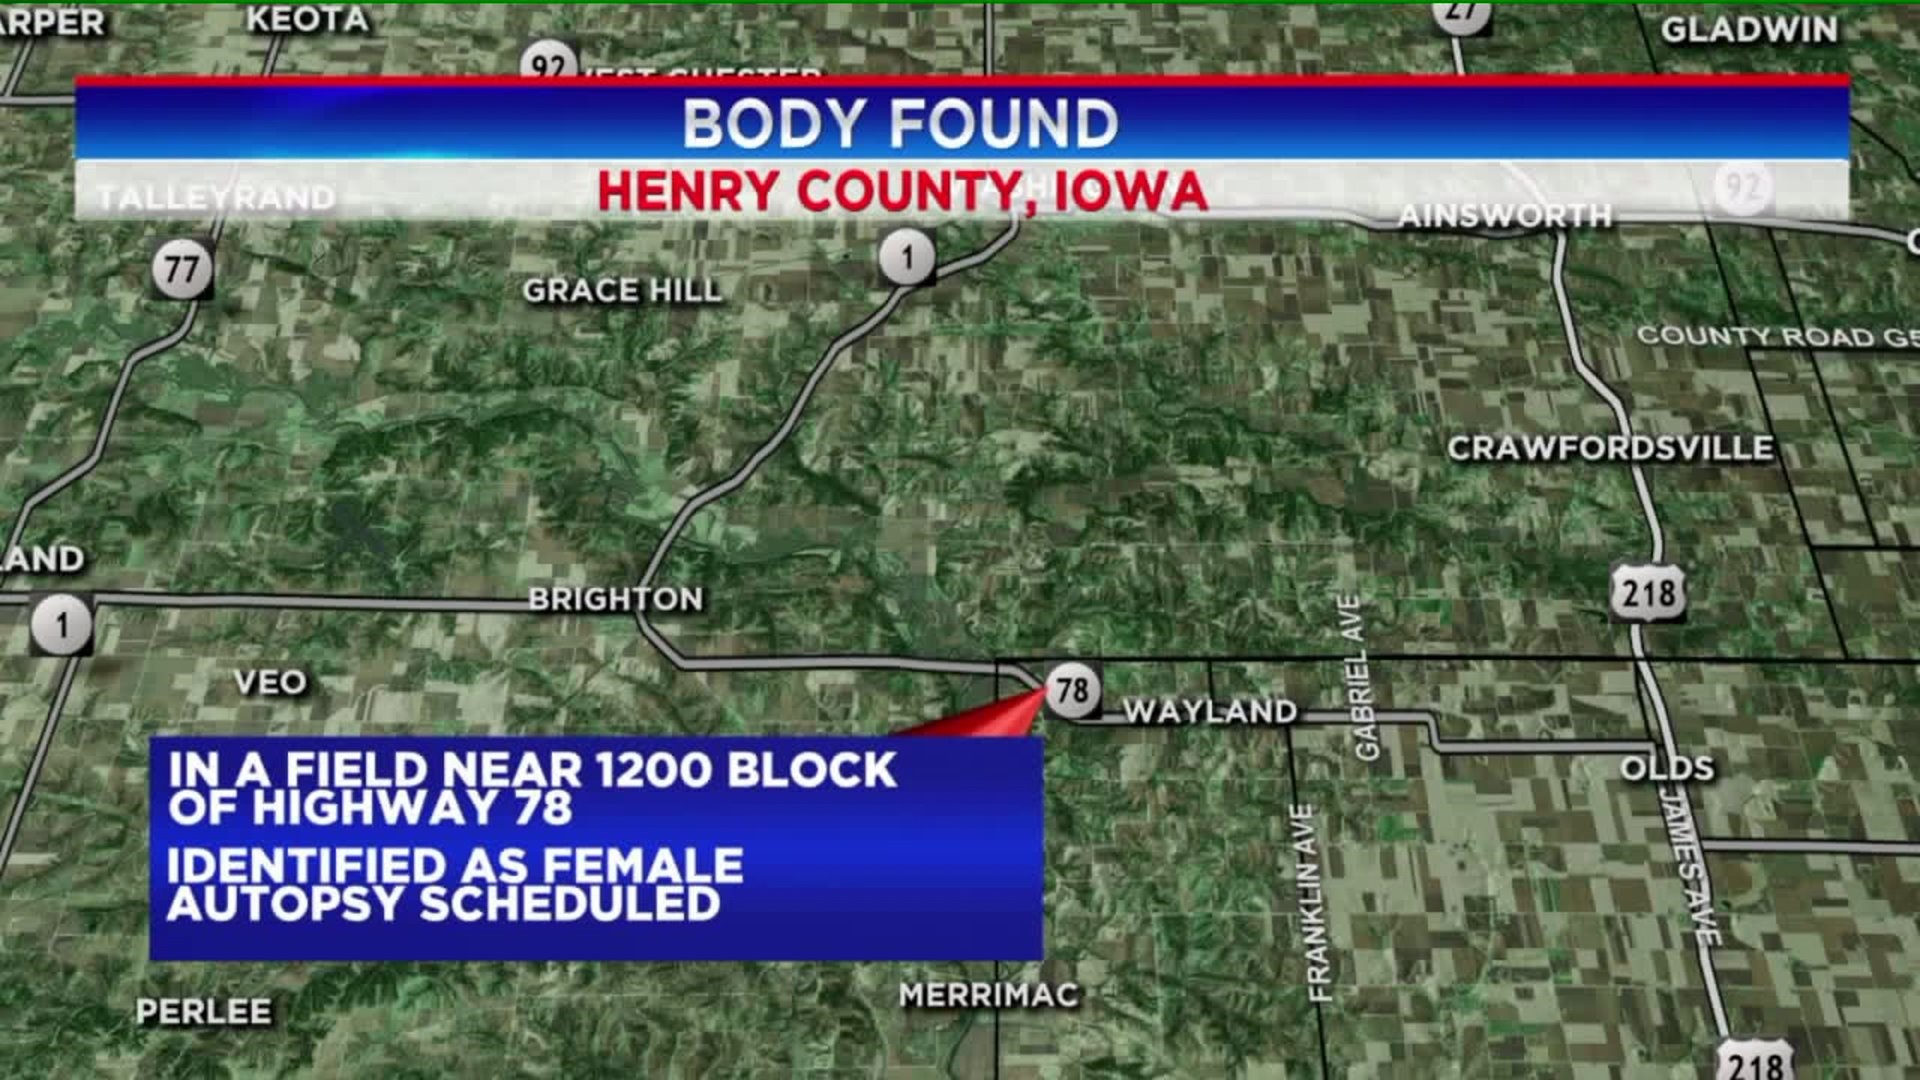 Henry County, IA: Dead body found in field, what we know